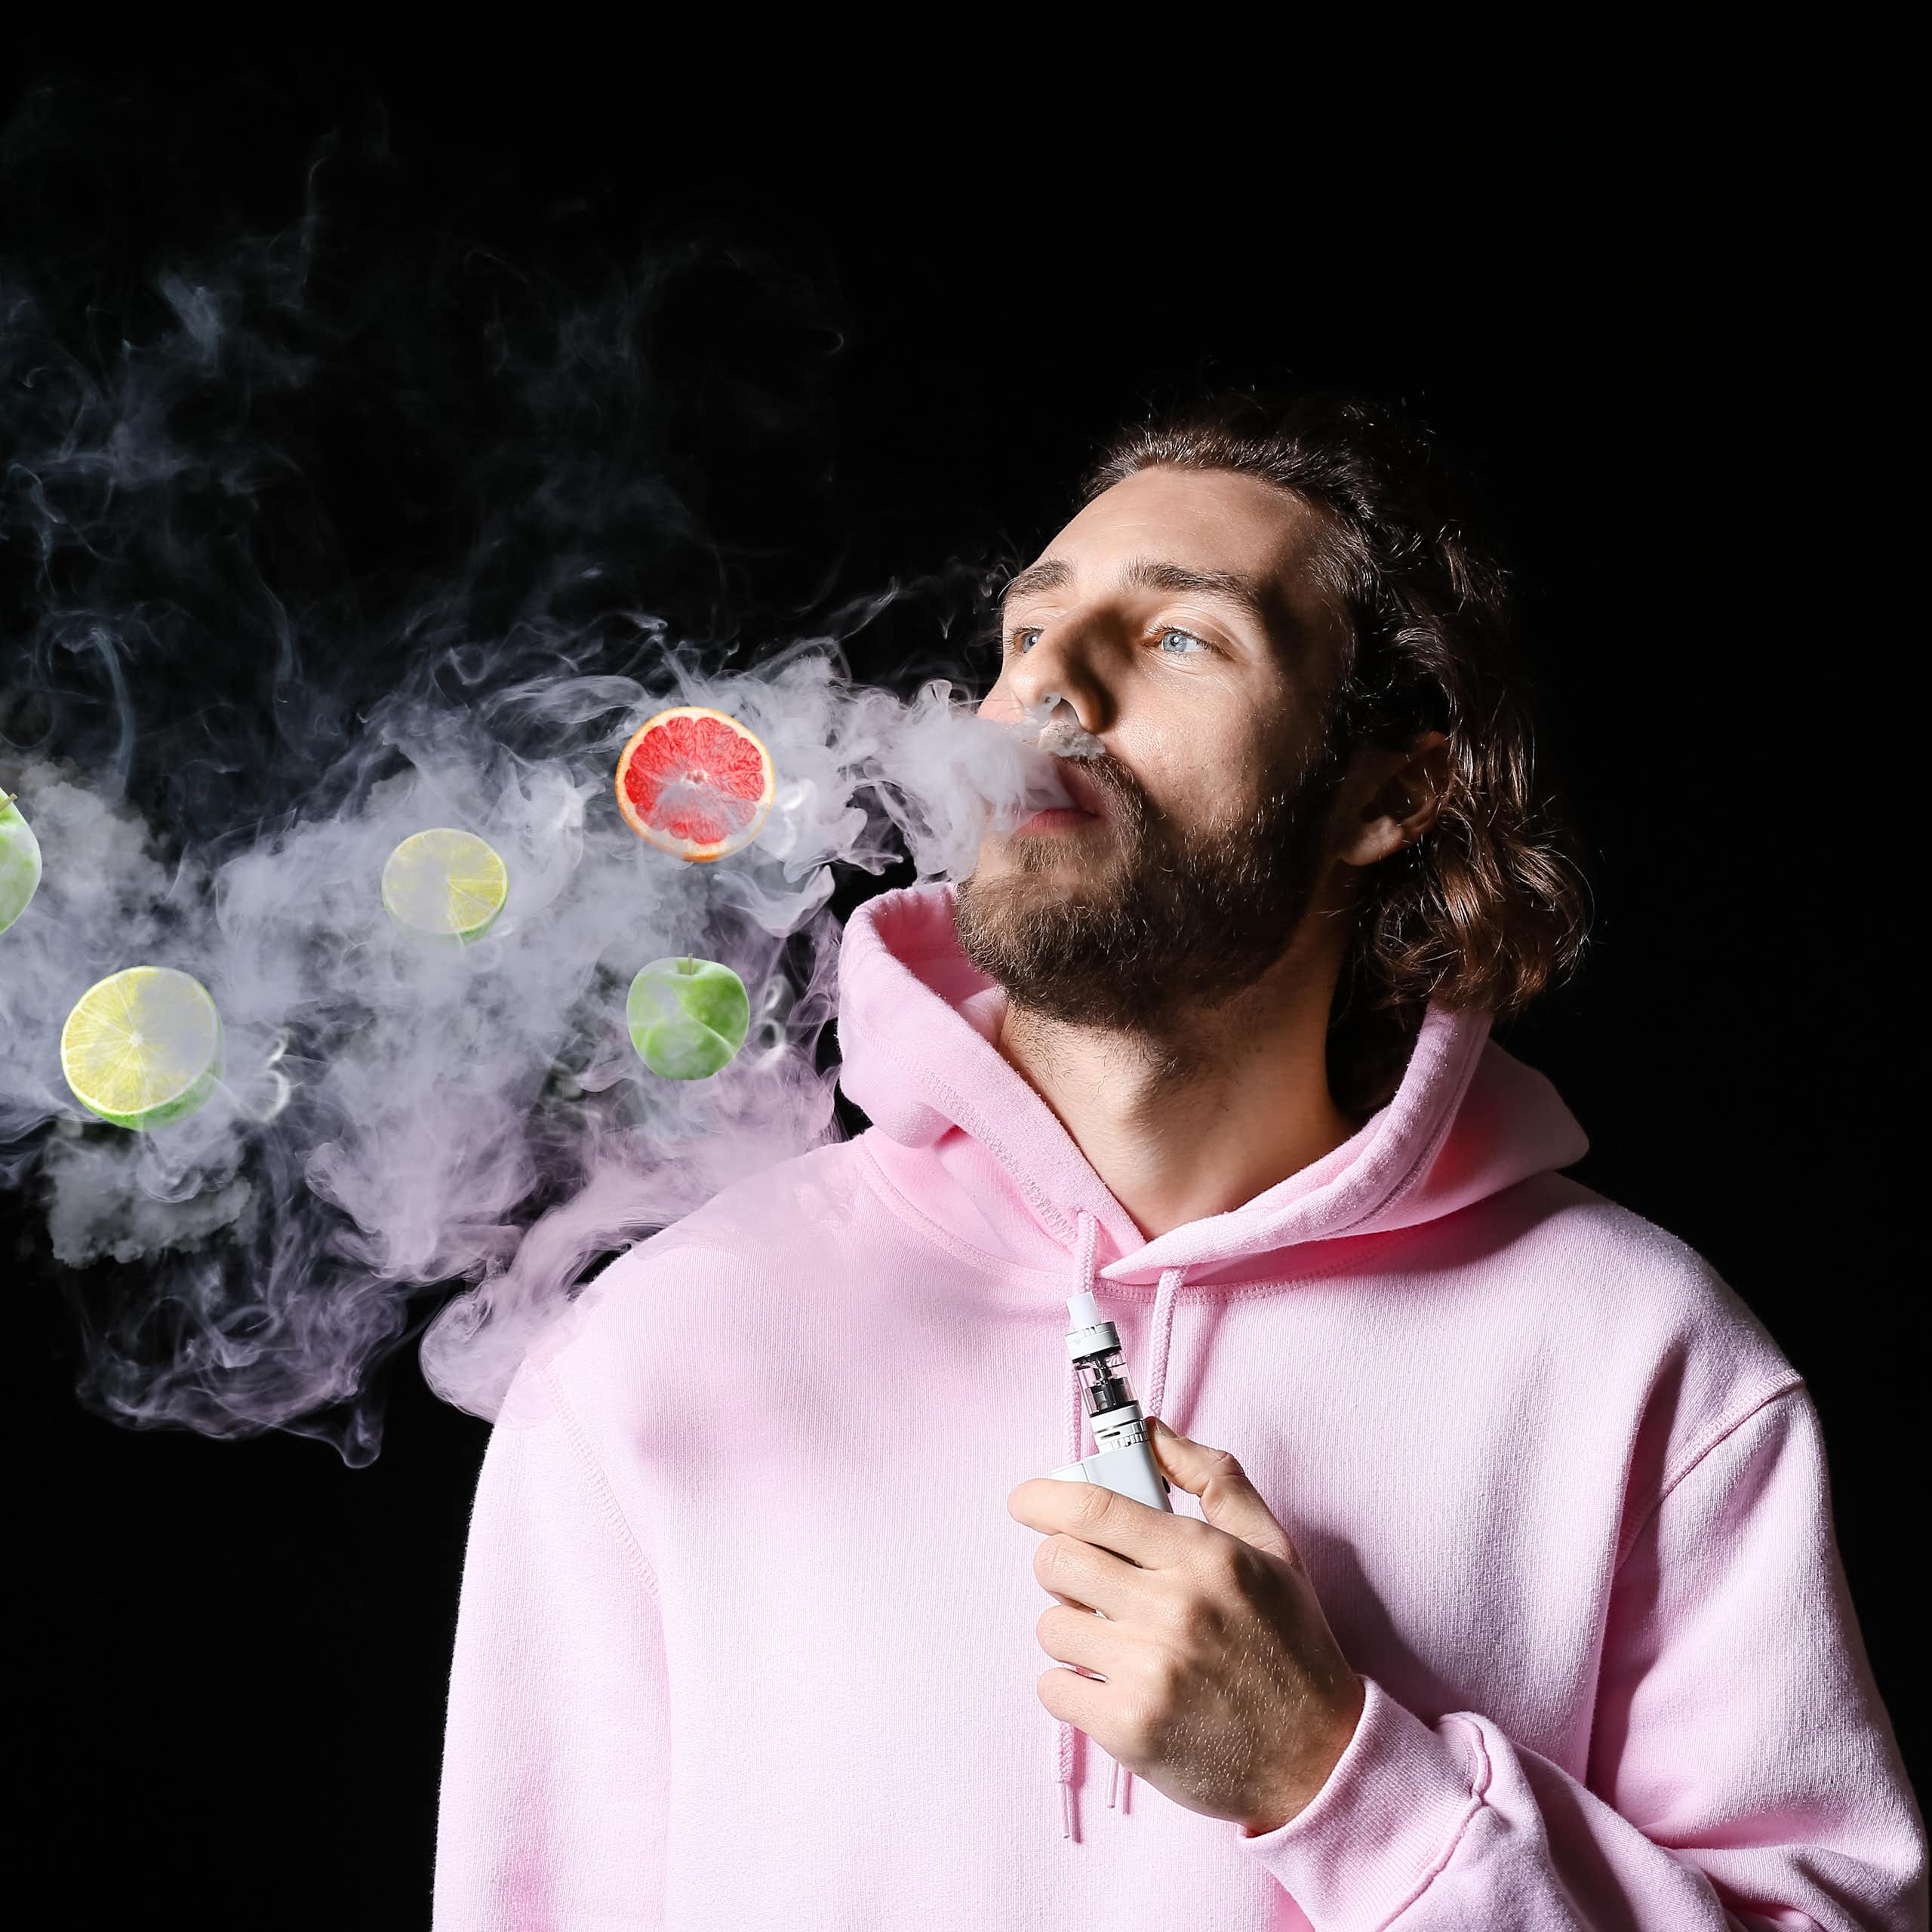 Flavoured vapes may produce many harmful chemicals when e-liquids are heated – new research